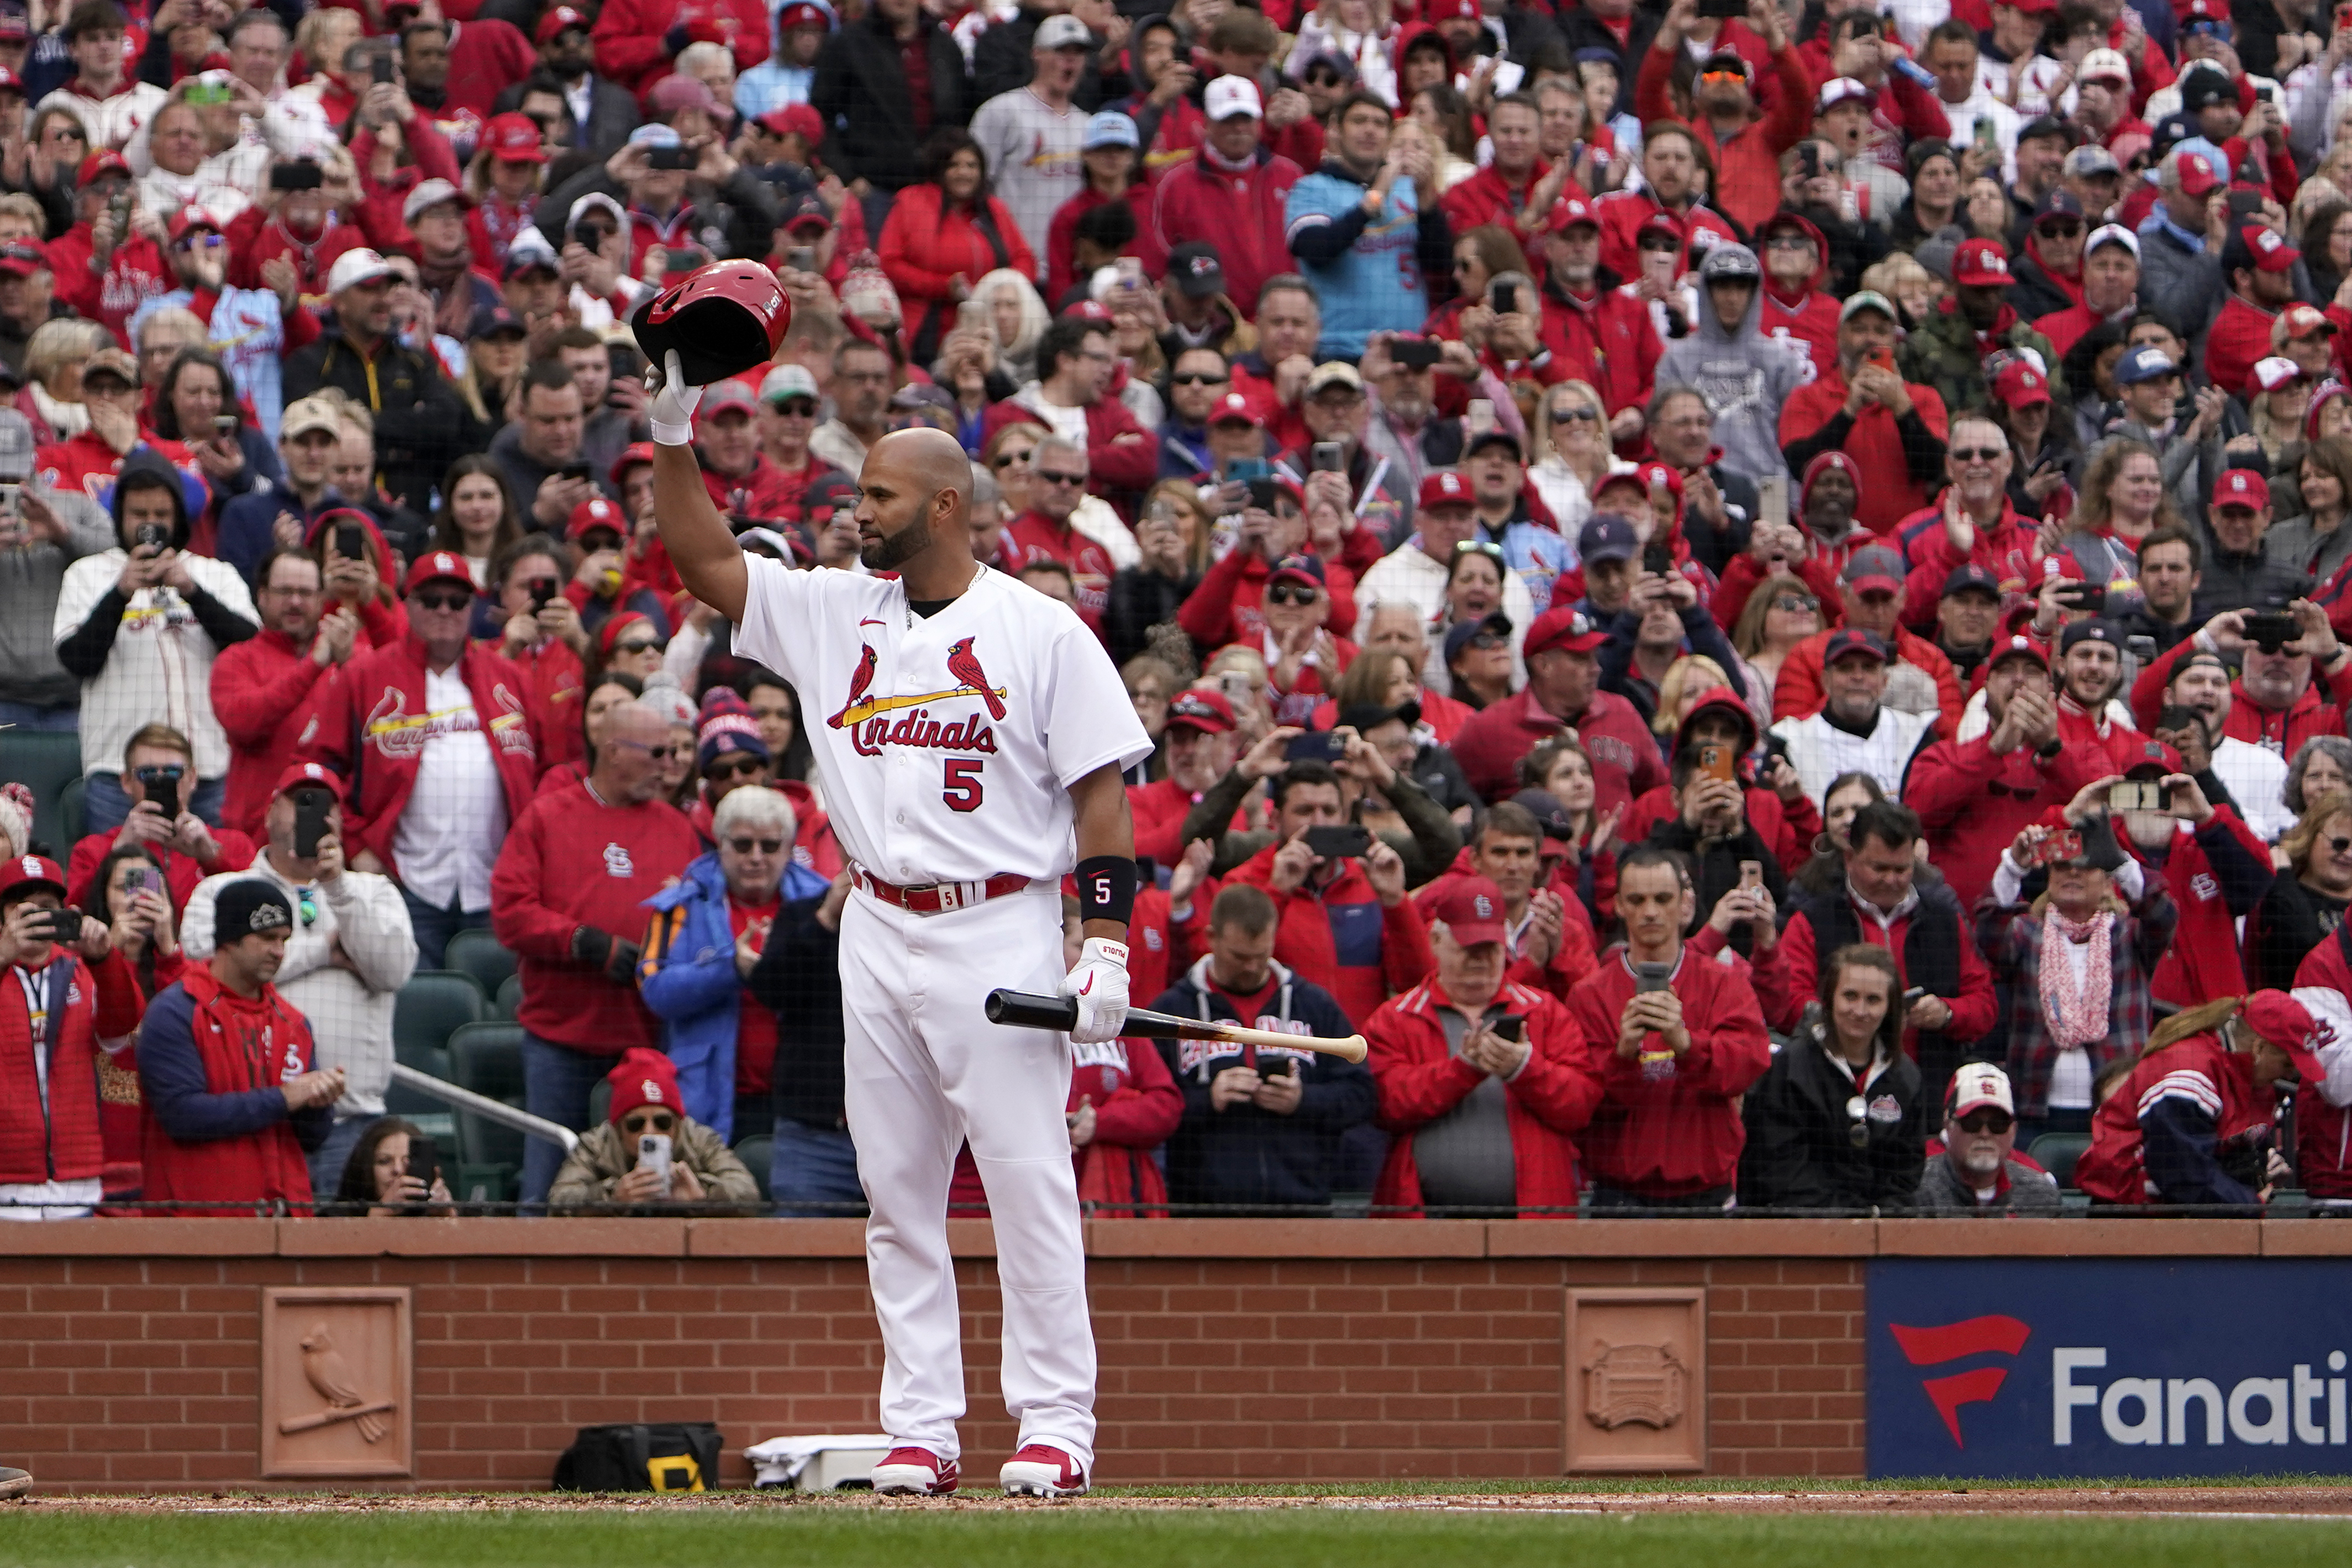 Pujols, Cabrera added to MLB All-Star Game rosters 